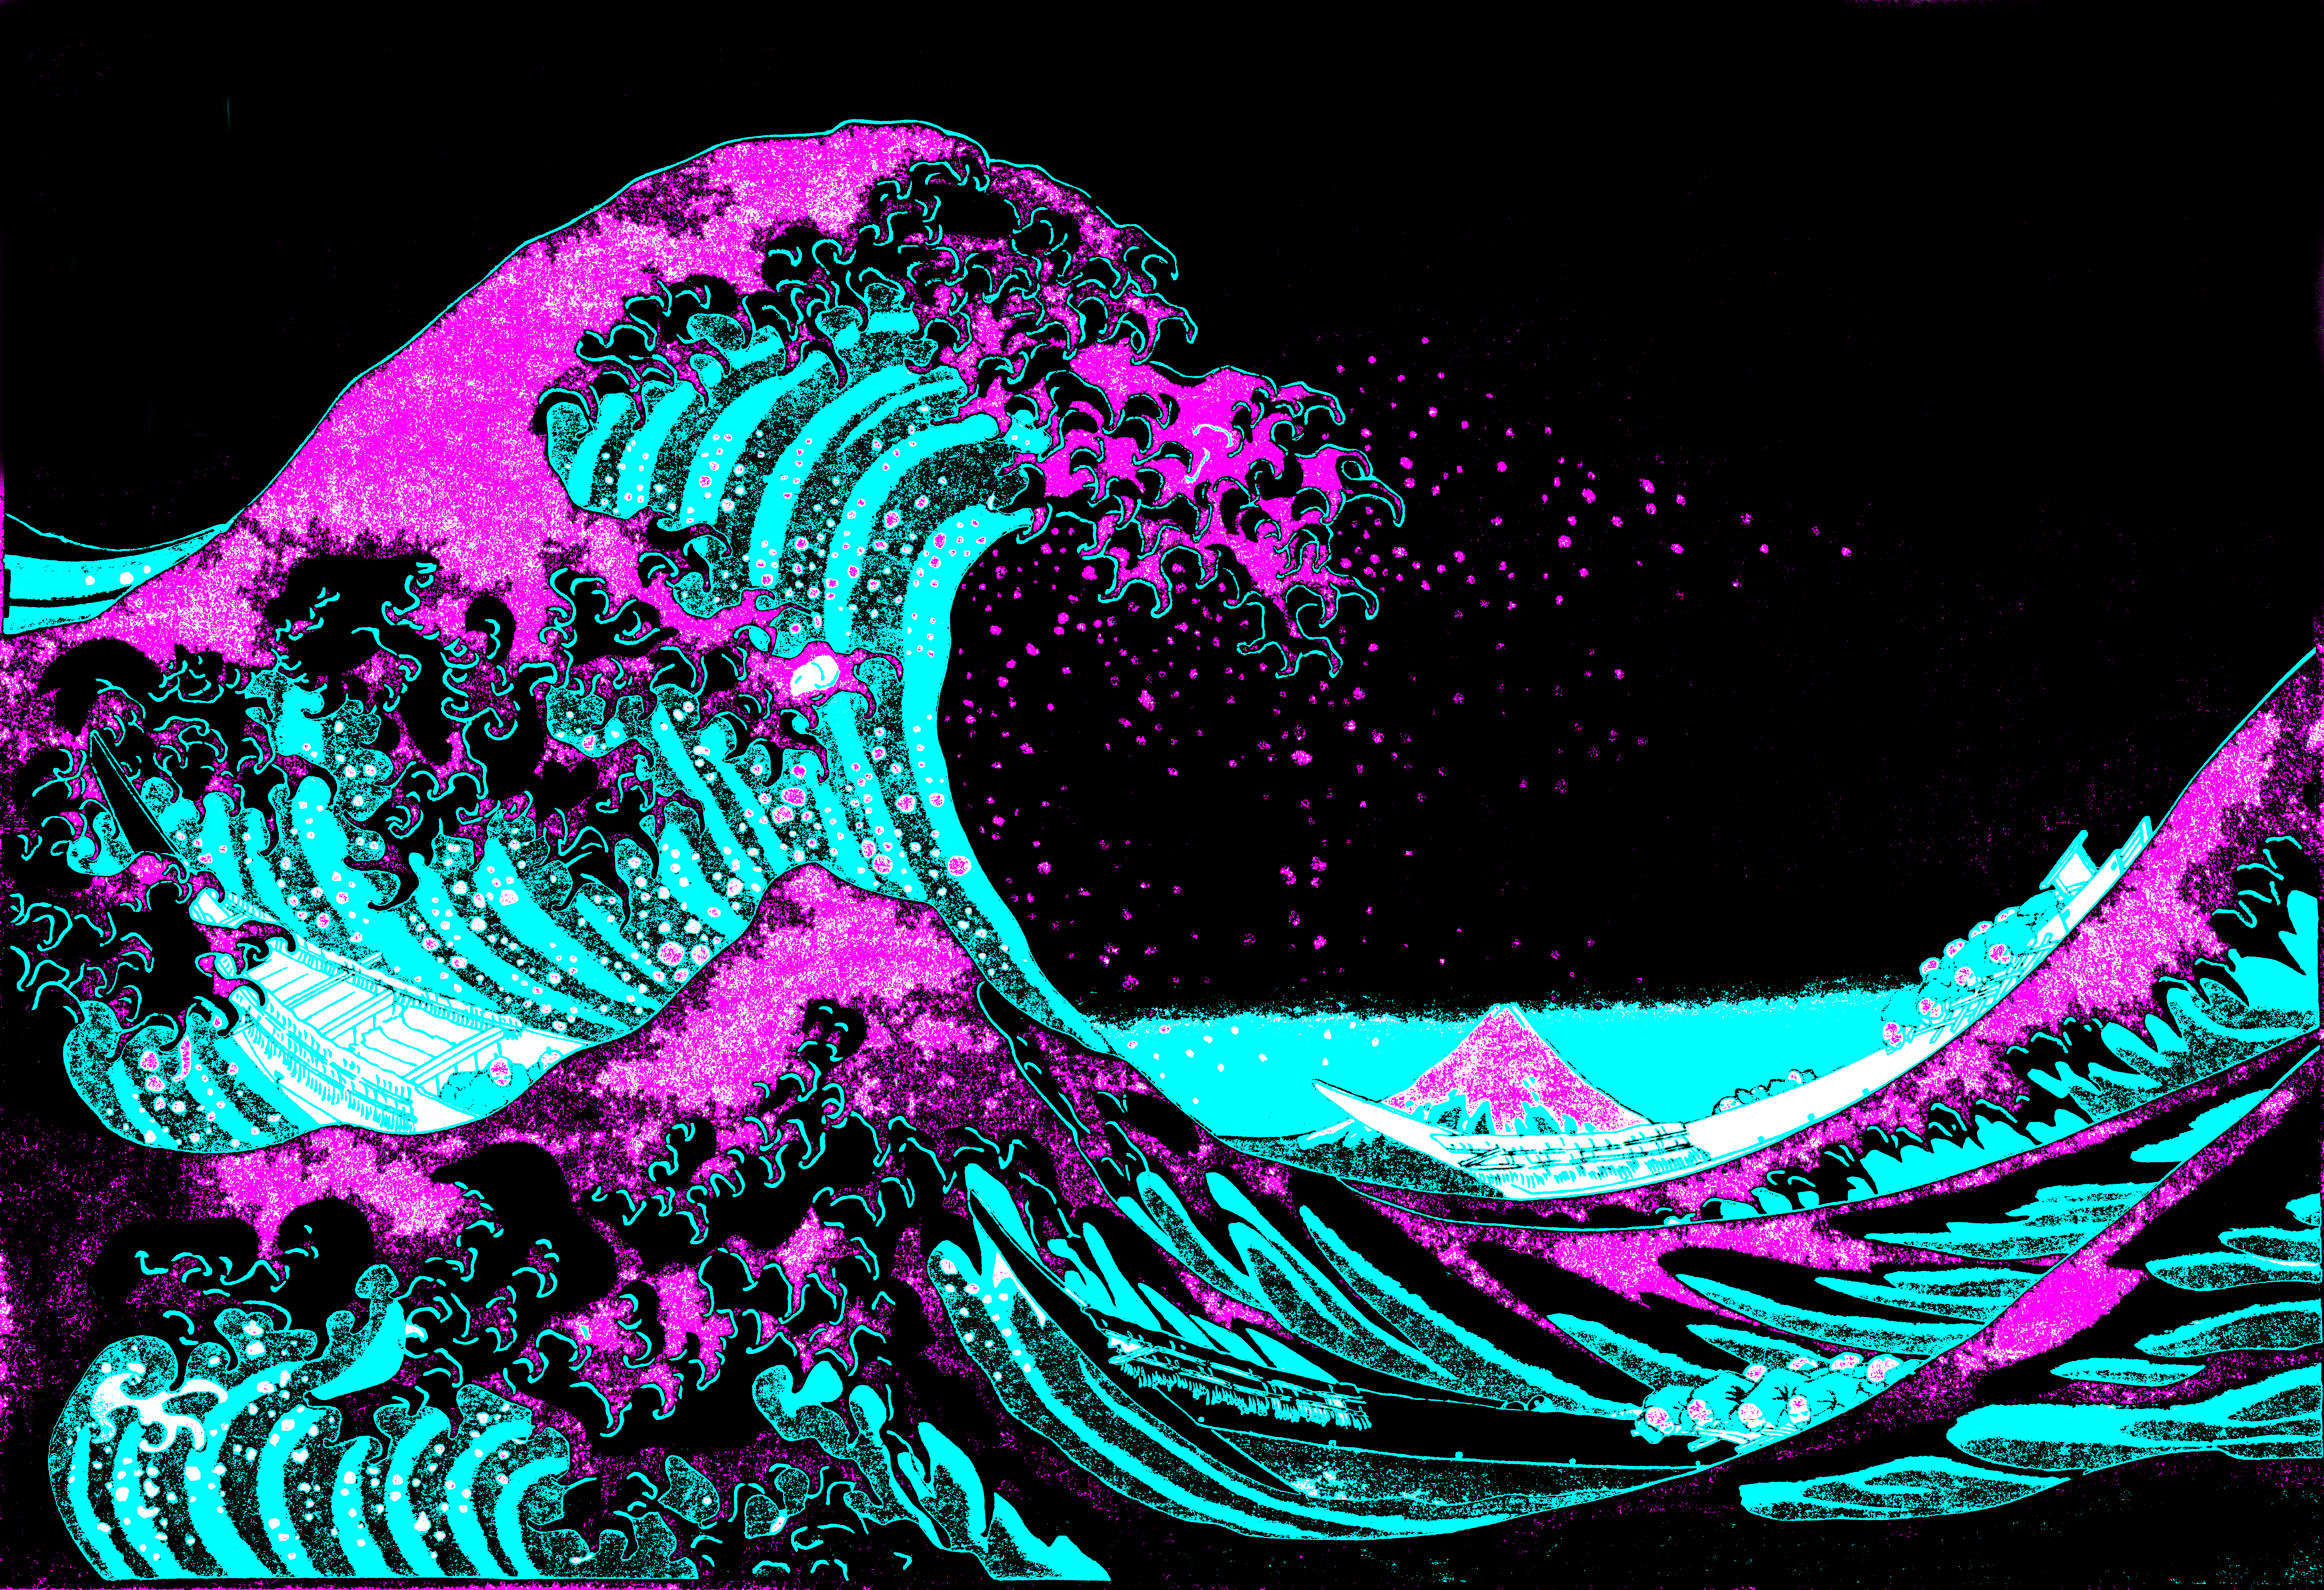 Aggregate 84+ the great wave off kanagawa wallpaper - in.coedo.com.vn